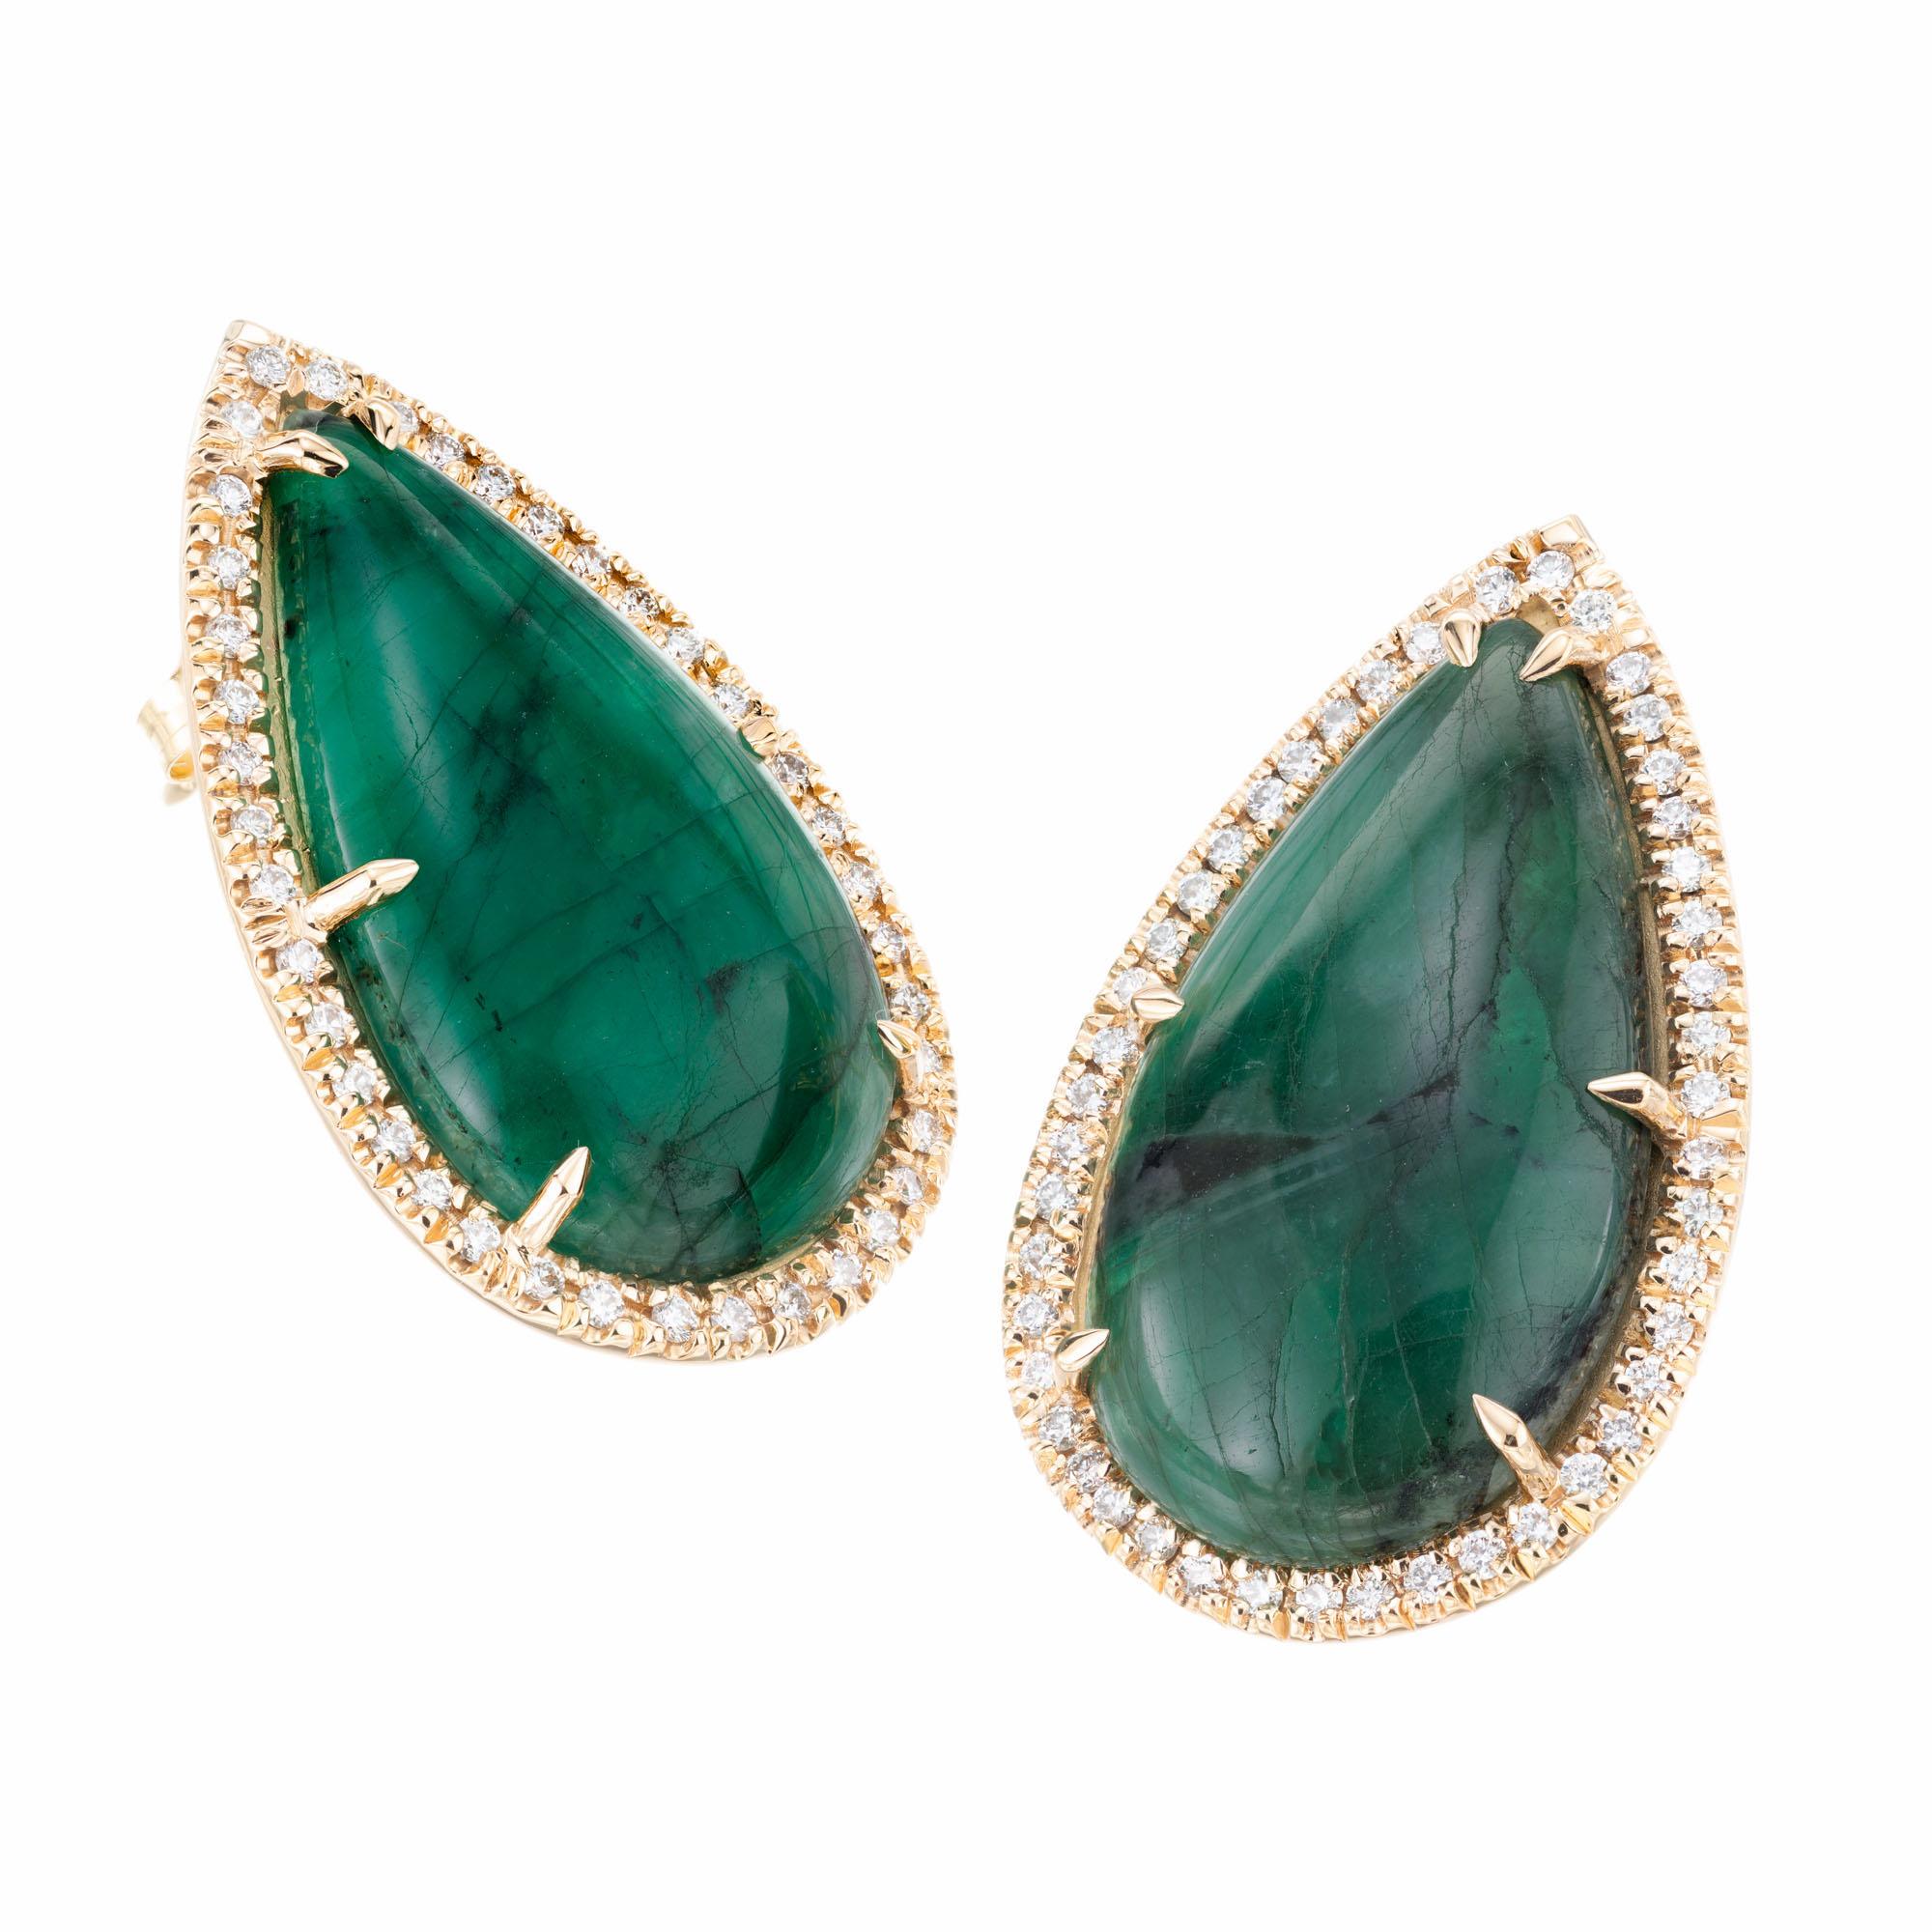 Pear shape cabochon 15.53 carat emerald diamond earrings. GIA certified natural untreated emeralds with 85 round brilliant cut diamond halos. Created in the in the Peter Suchy workshop.

2 pear shaped green cabochon emeralds, approx. 15.53cts GIA